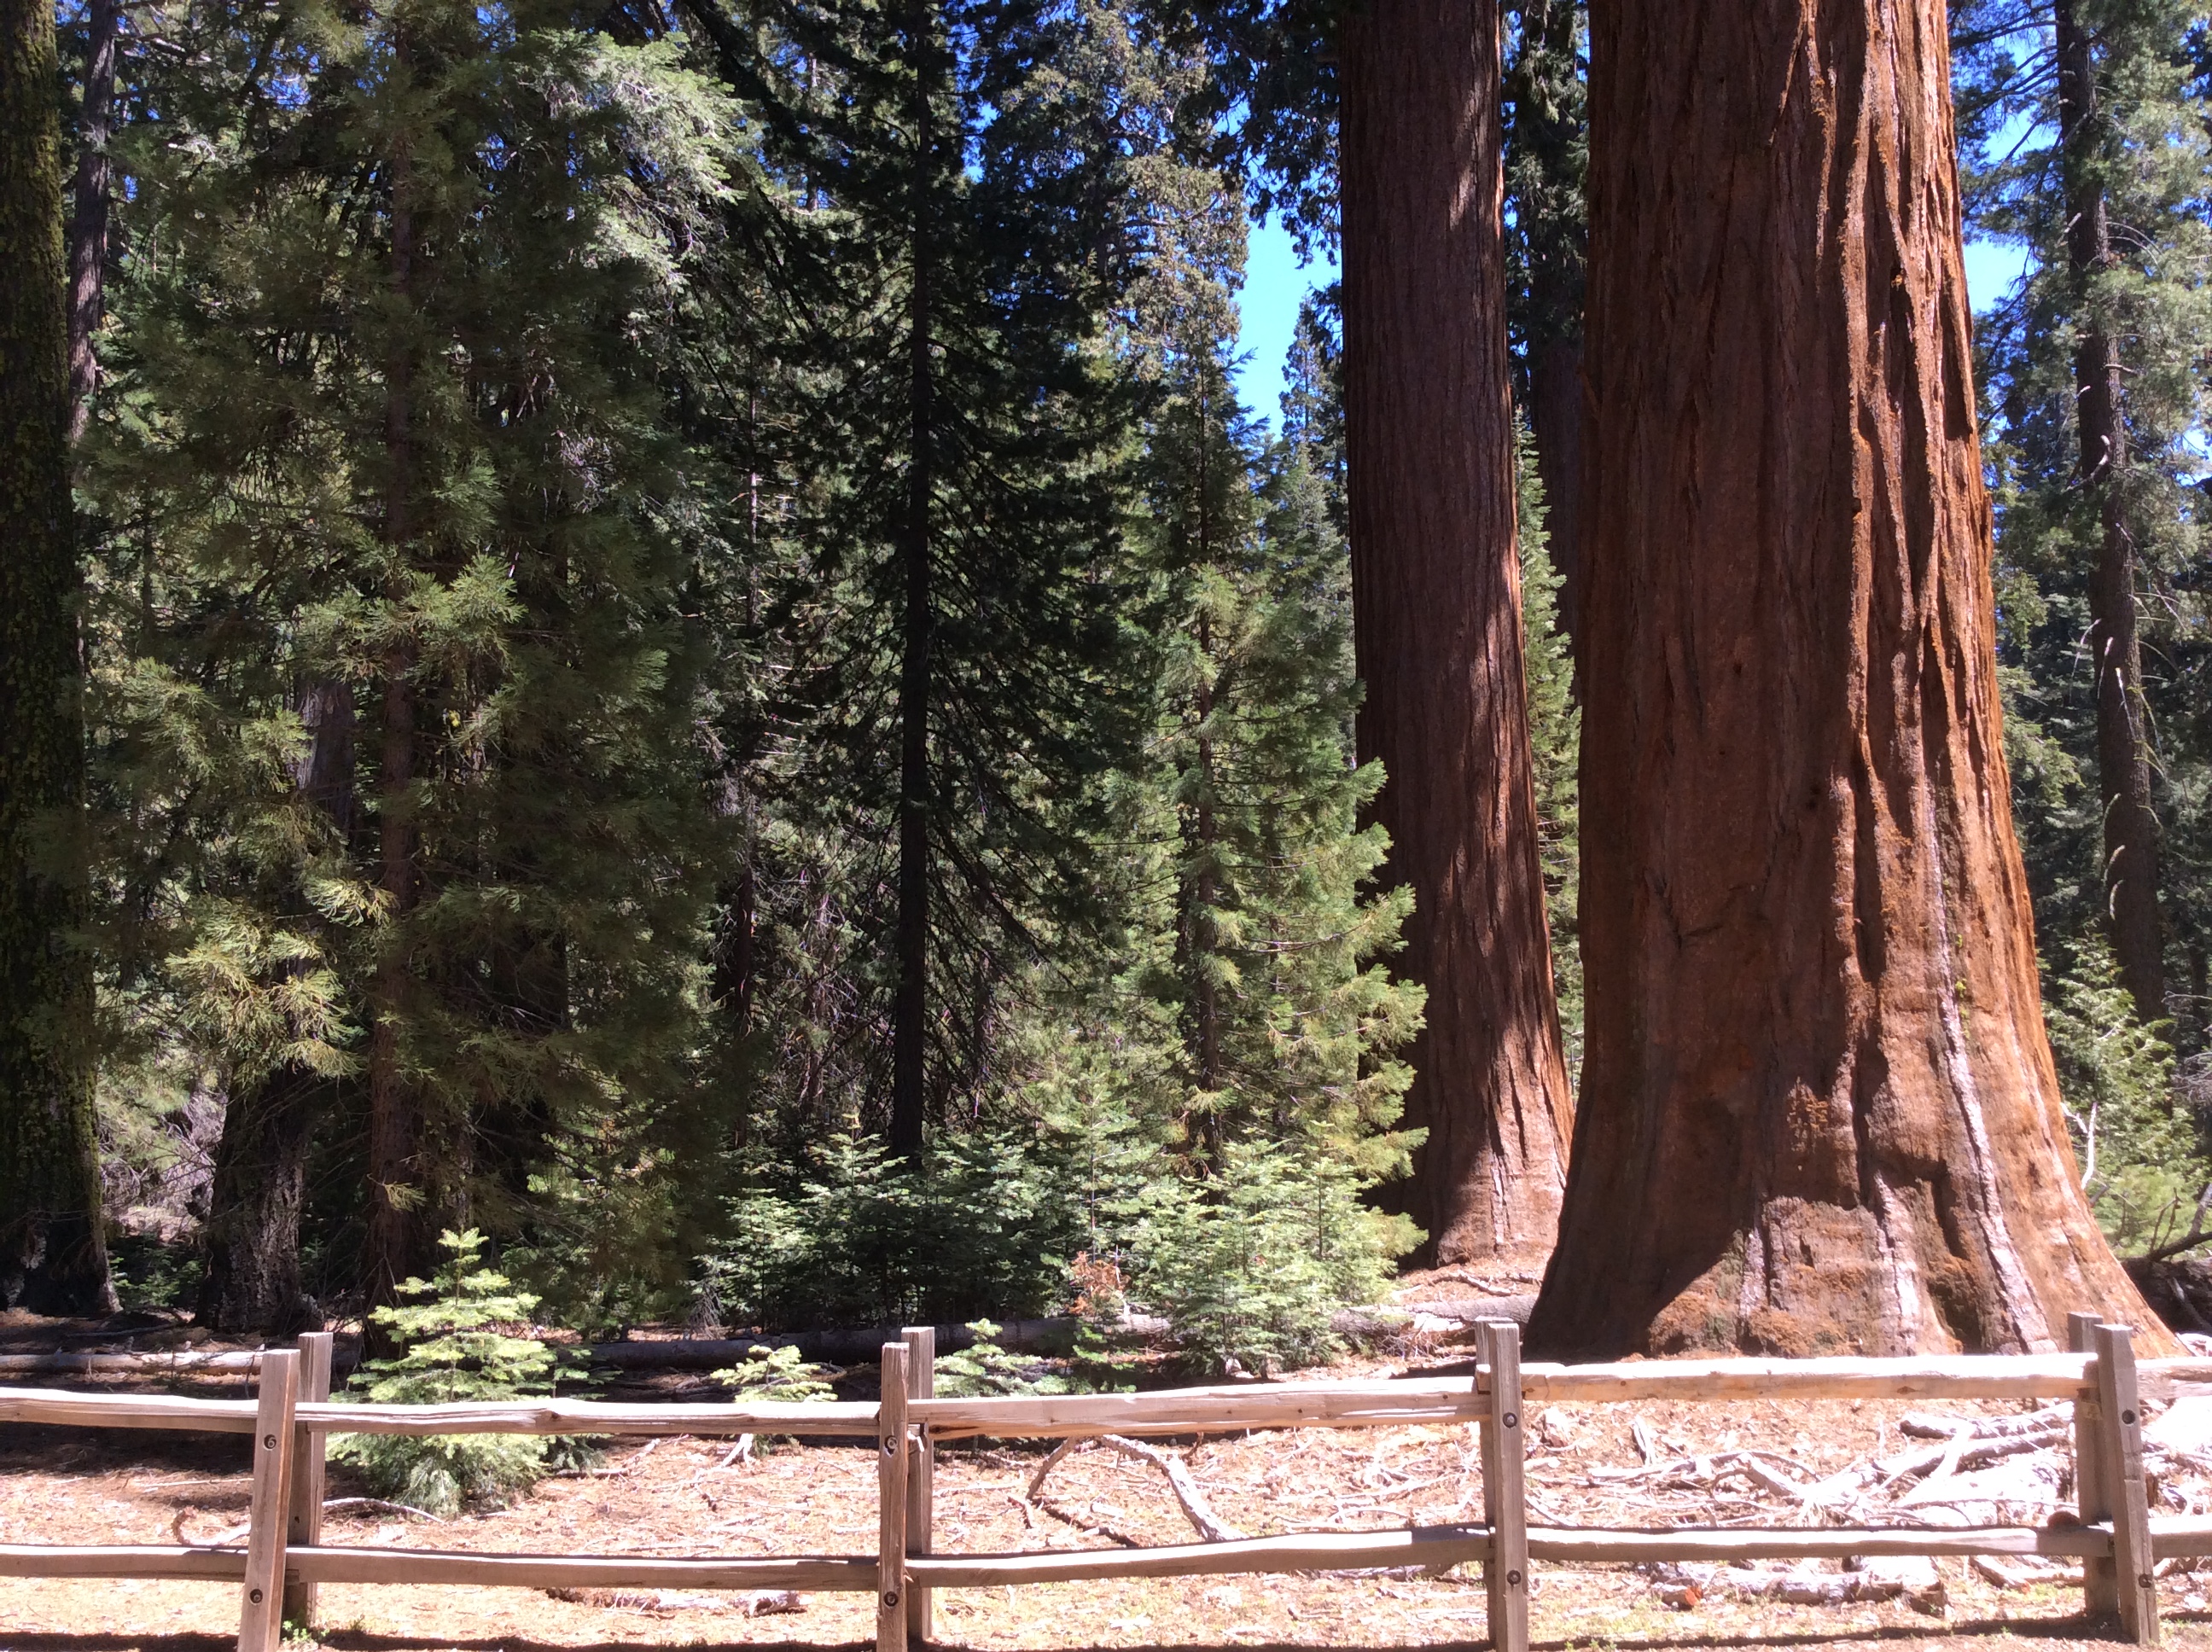 Grant Grove Area Trails - Sequoia Kings Canyon National Parks (U.S. National Park Service)